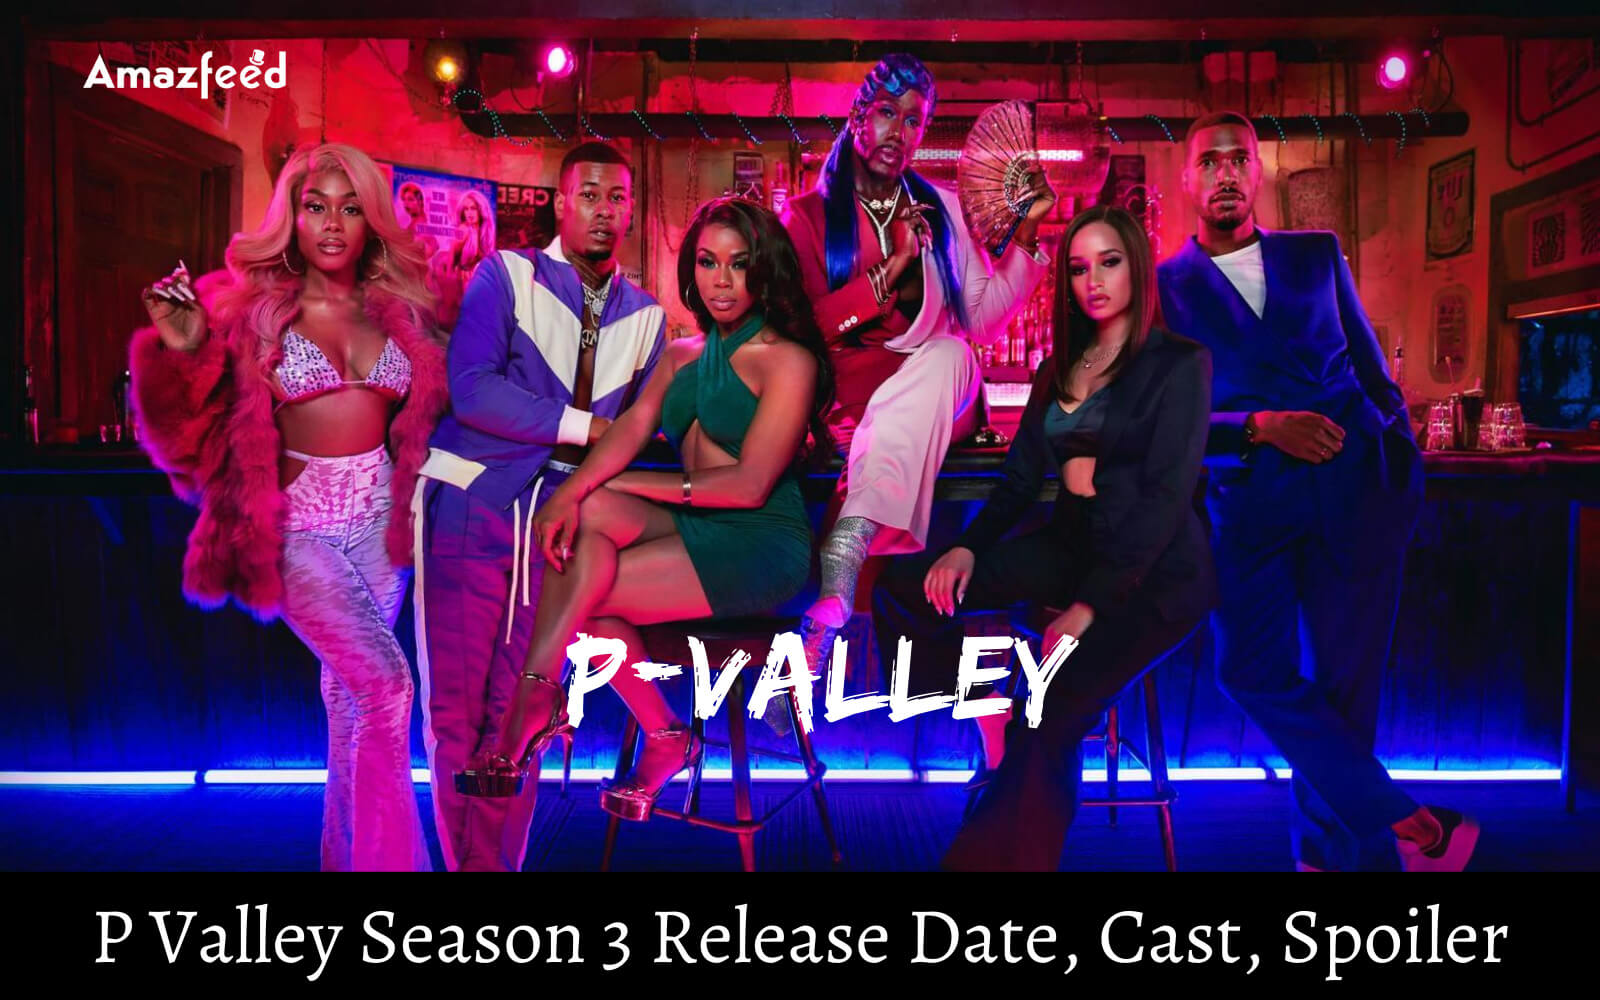 P Valley Season 3 ⇒ Release Date, News, Cast, Spoilers & Updates » Amazfeed